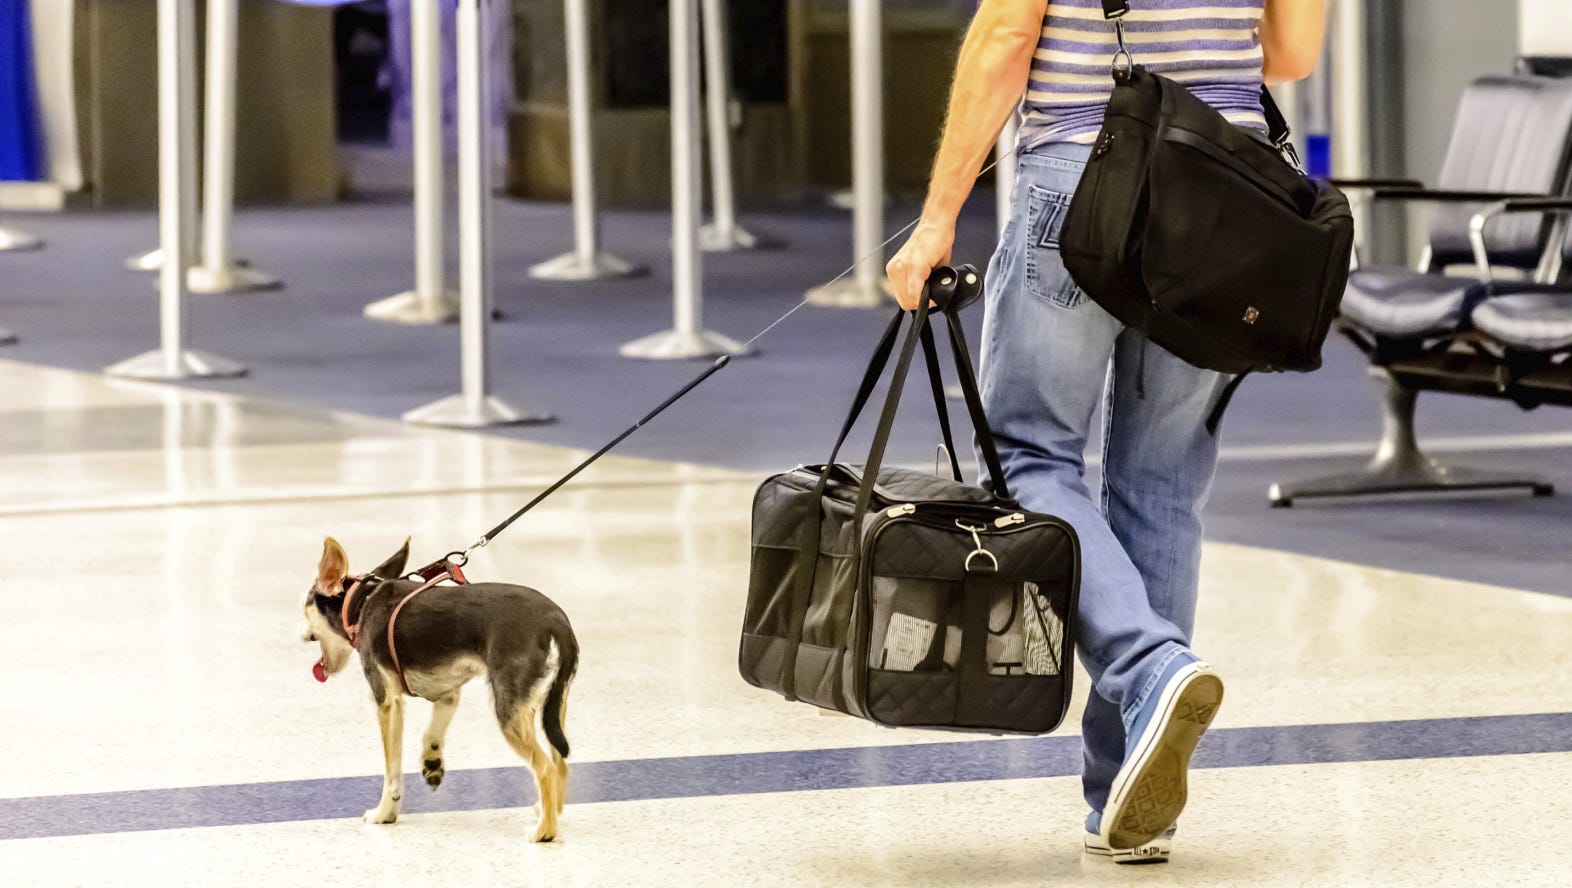 jet blue travel with pets